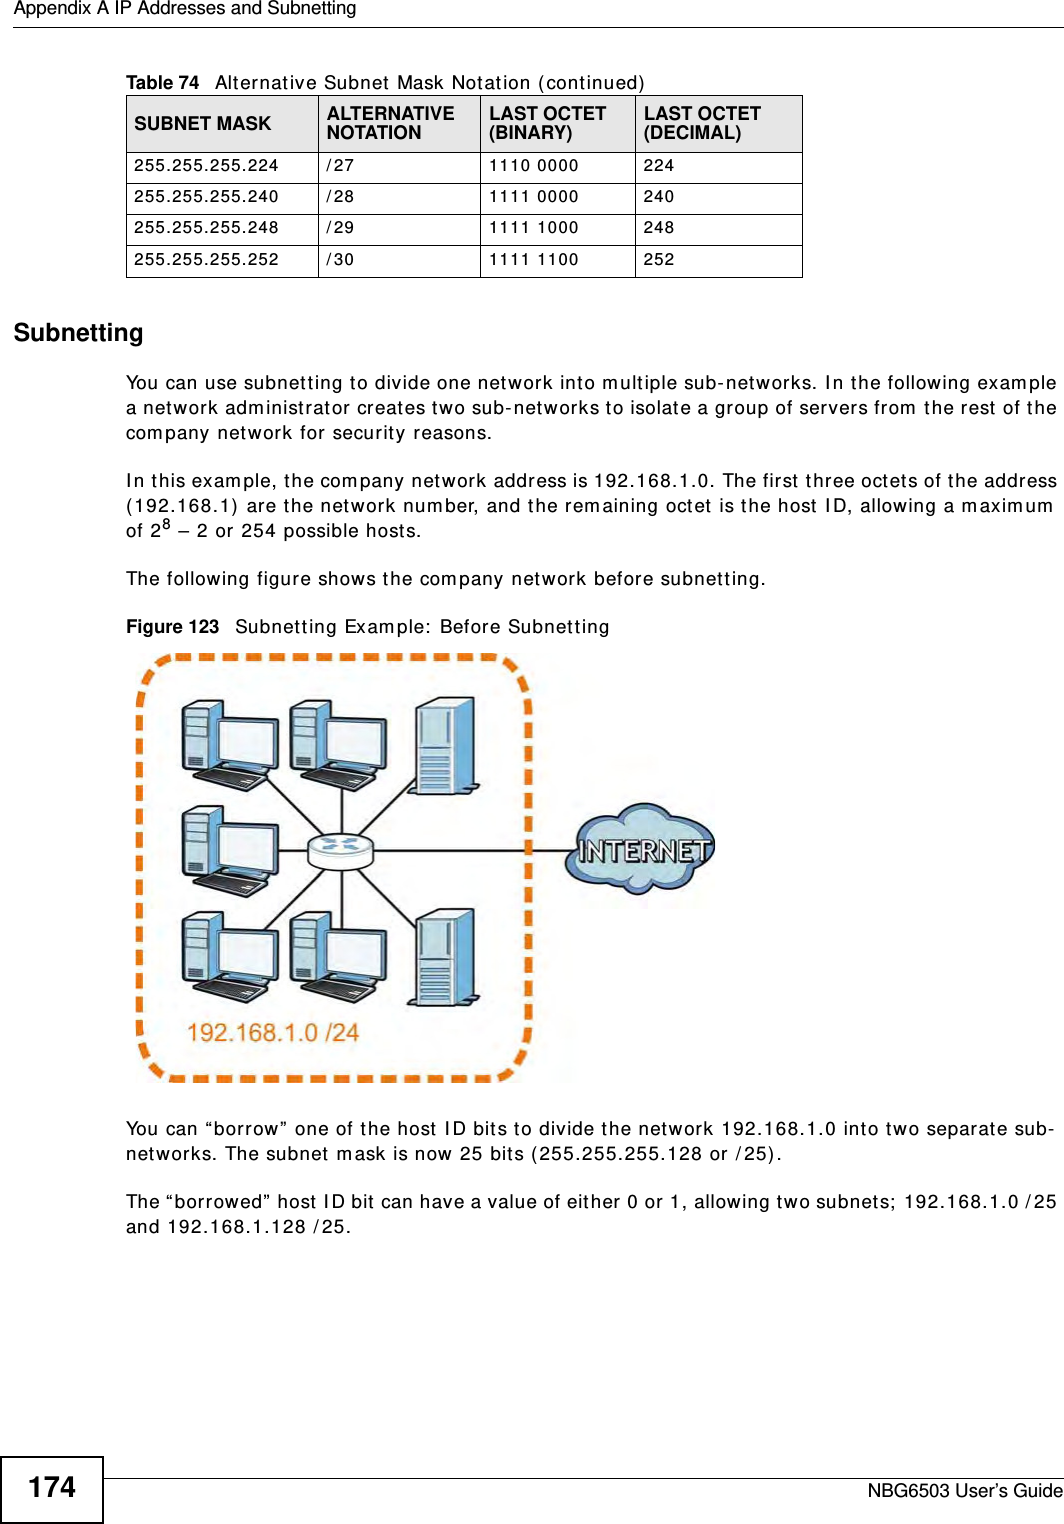 Appendix A IP Addresses and SubnettingNBG6503 User’s Guide174SubnettingYou can use subnetting to divide one network into multiple sub-networks. In the following example a network administrator creates two sub-networks to isolate a group of servers from the rest of the company network for security reasons.In this example, the company network address is 192.168.1.0. The first three octets of the address (192.168.1) are the network number, and the remaining octet is the host ID, allowing a maximum of 28 – 2 or 254 possible hosts.The following figure shows the company network before subnetting.  Figure 123   Subnetting Example: Before SubnettingYou can “borrow” one of the host ID bits to divide the network 192.168.1.0 into two separate sub-networks. The subnet mask is now 25 bits (255.255.255.128 or /25).The “borrowed” host ID bit can have a value of either 0 or 1, allowing two subnets; 192.168.1.0 /25 and 192.168.1.128 /25. 255.255.255.224 /27 1110 0000 224255.255.255.240 /28 1111 0000 240255.255.255.248 /29 1111 1000 248255.255.255.252 /30 1111 1100 252Table 74   Alternative Subnet Mask Notation (continued)SUBNET MASK ALTERNATIVE NOTATION LAST OCTET (BINARY) LAST OCTET (DECIMAL)